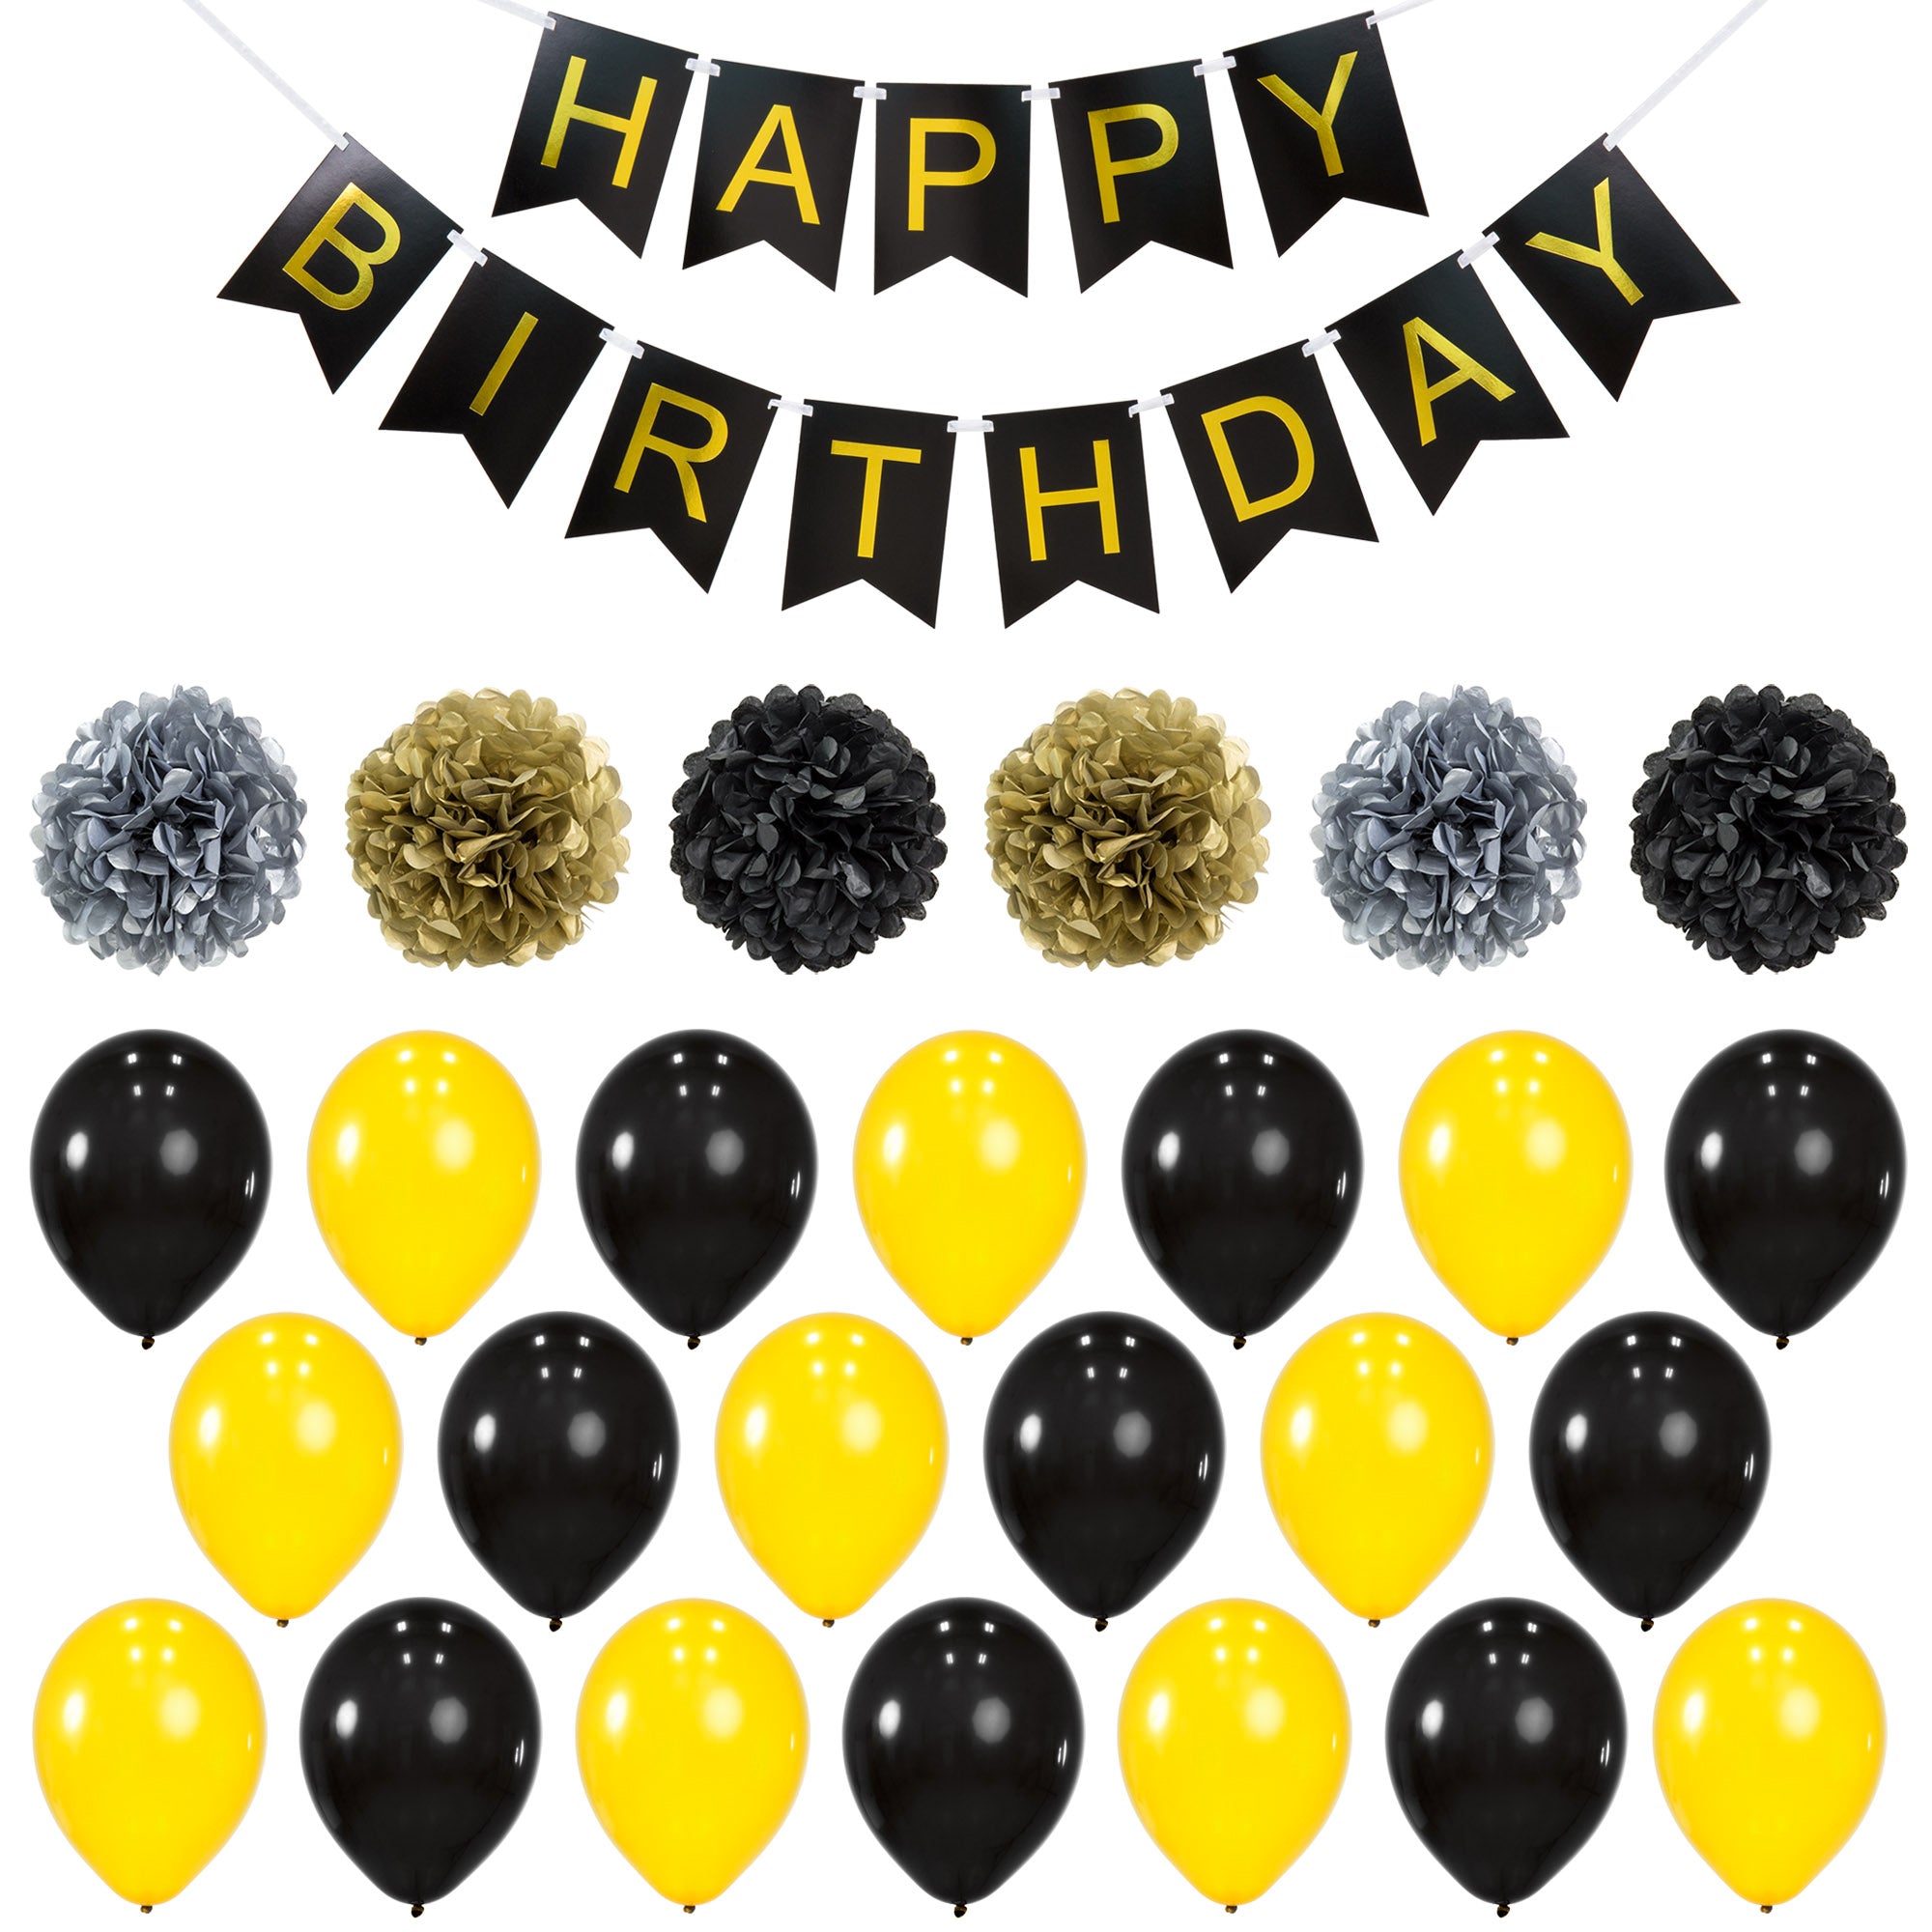 Best Choice Products Birthday Party Balloon Decor Set w/ Happy Birthday Banner, 6 Pom Poms, 20 Balloons Gold/Black